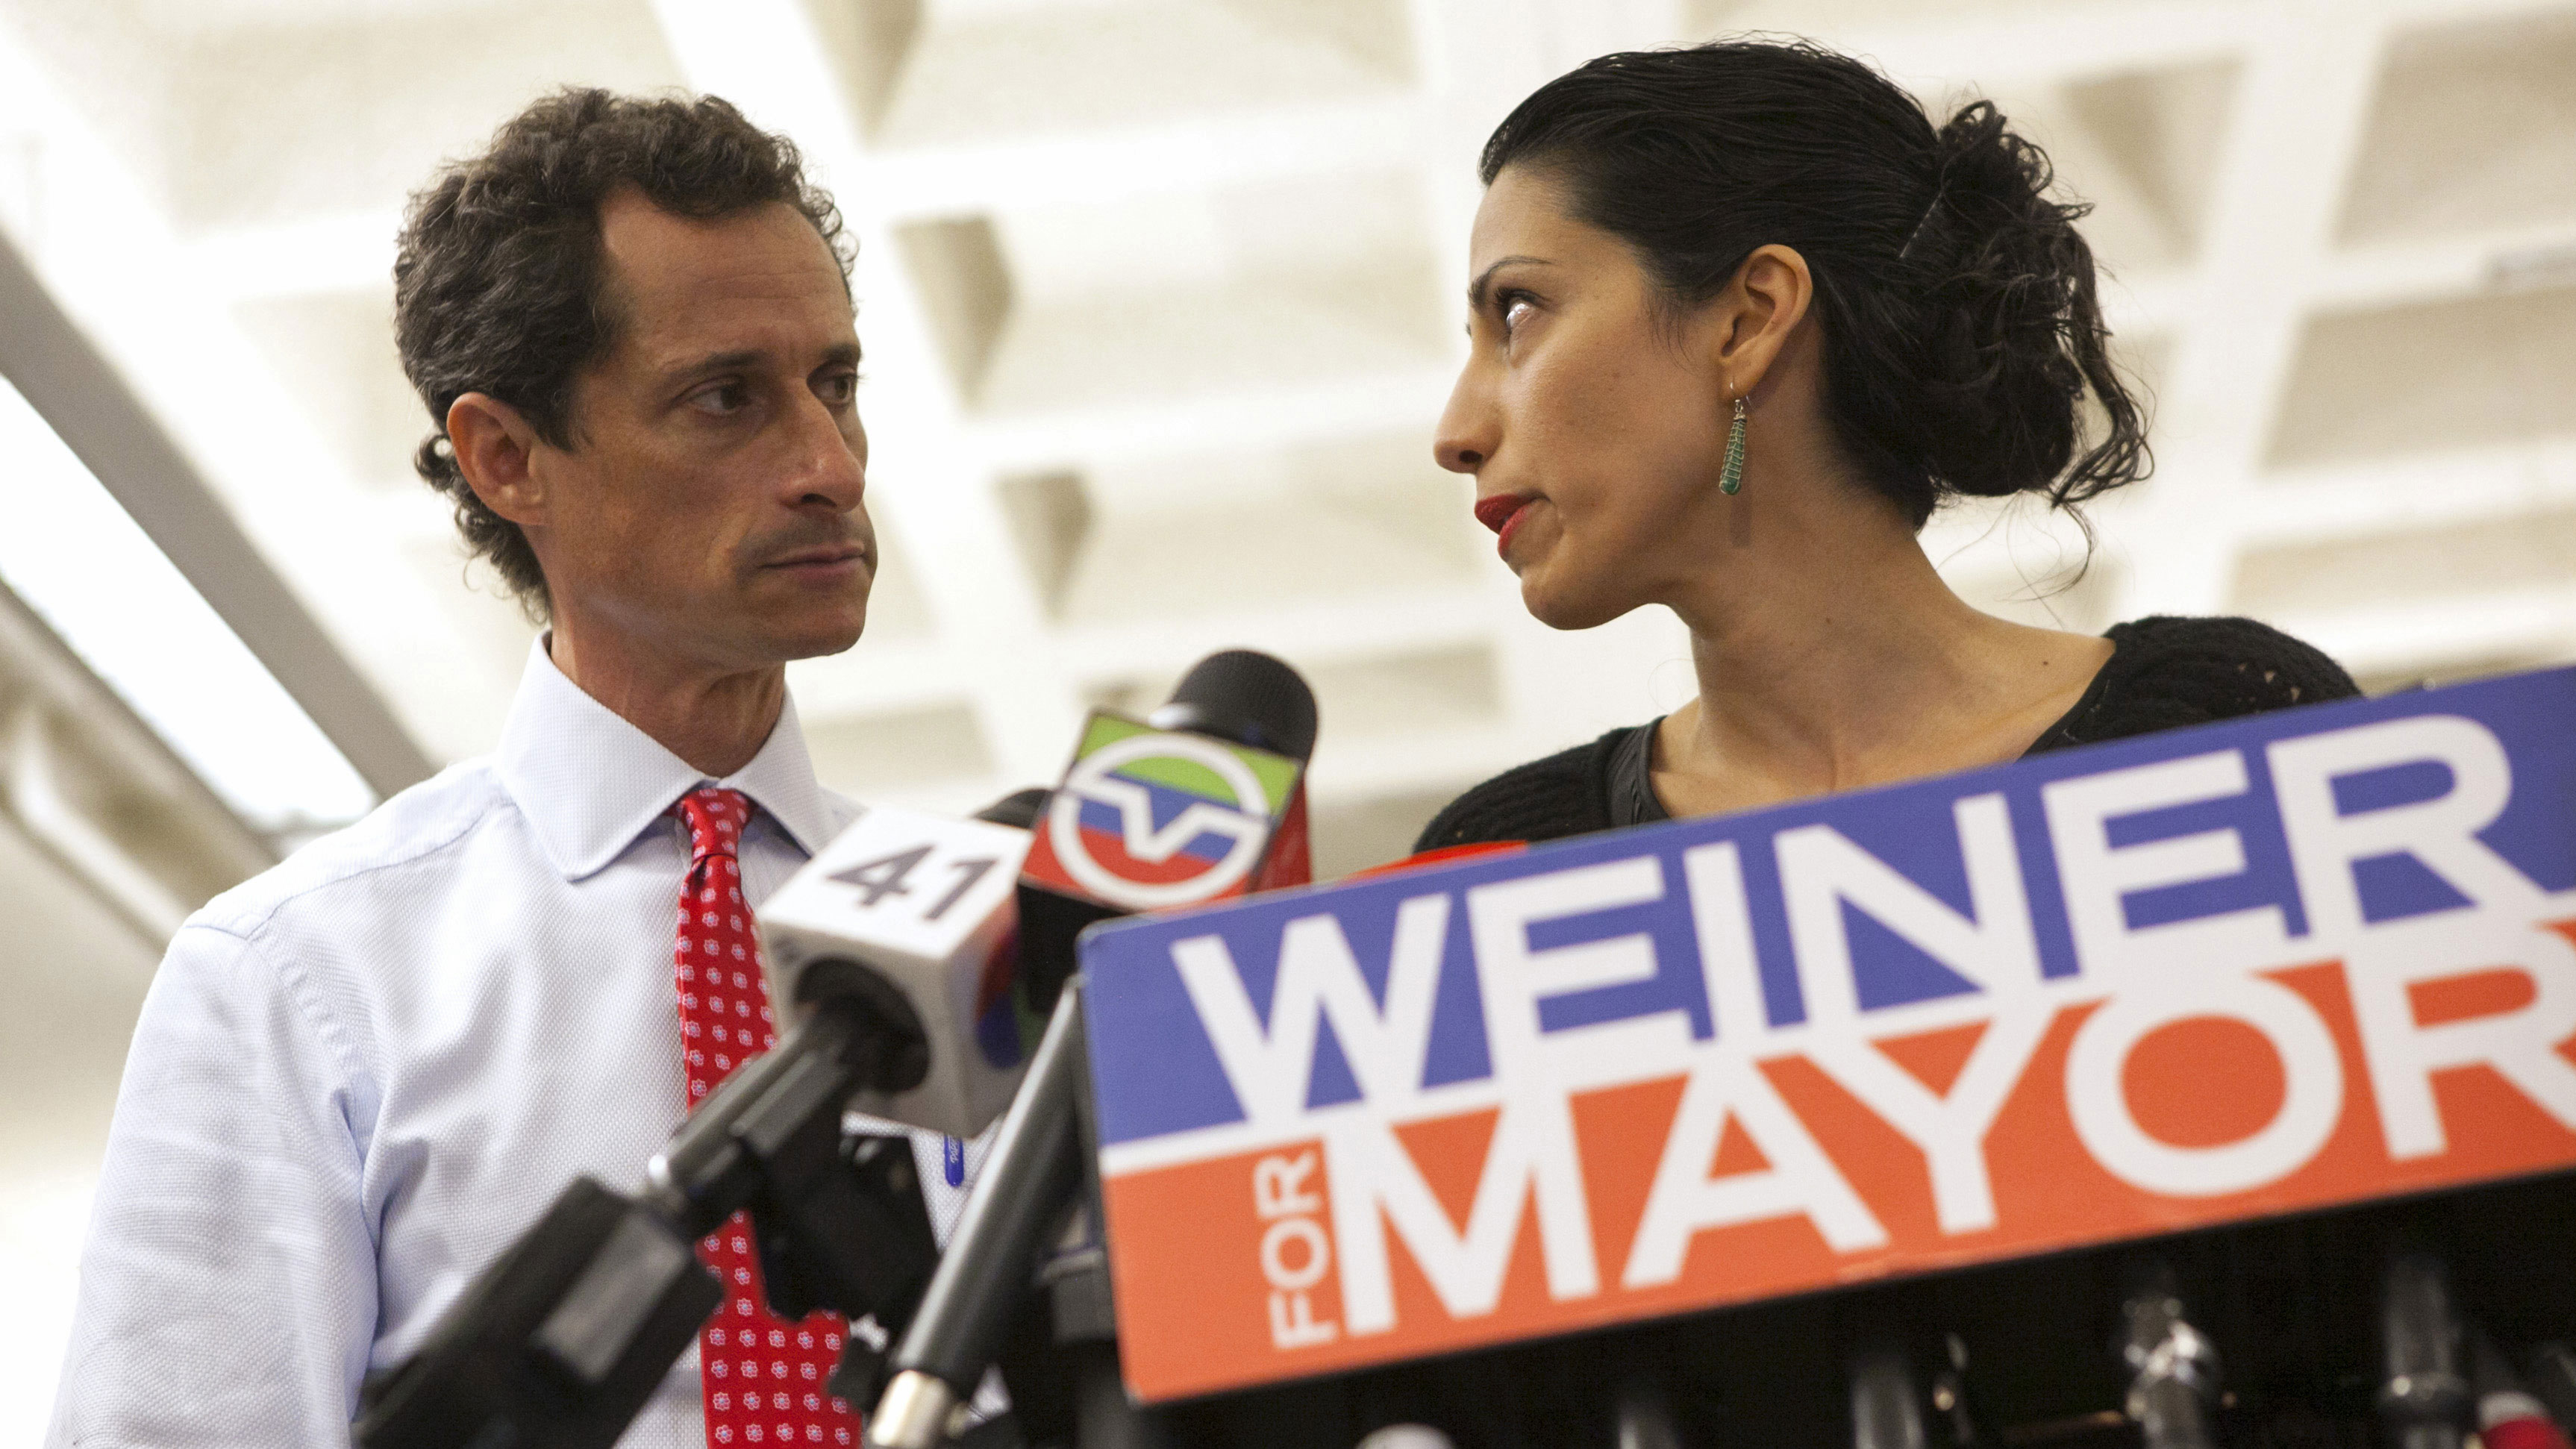 News scandal over Anthony Wiener who is seeking to become New York mayor (Reuters)